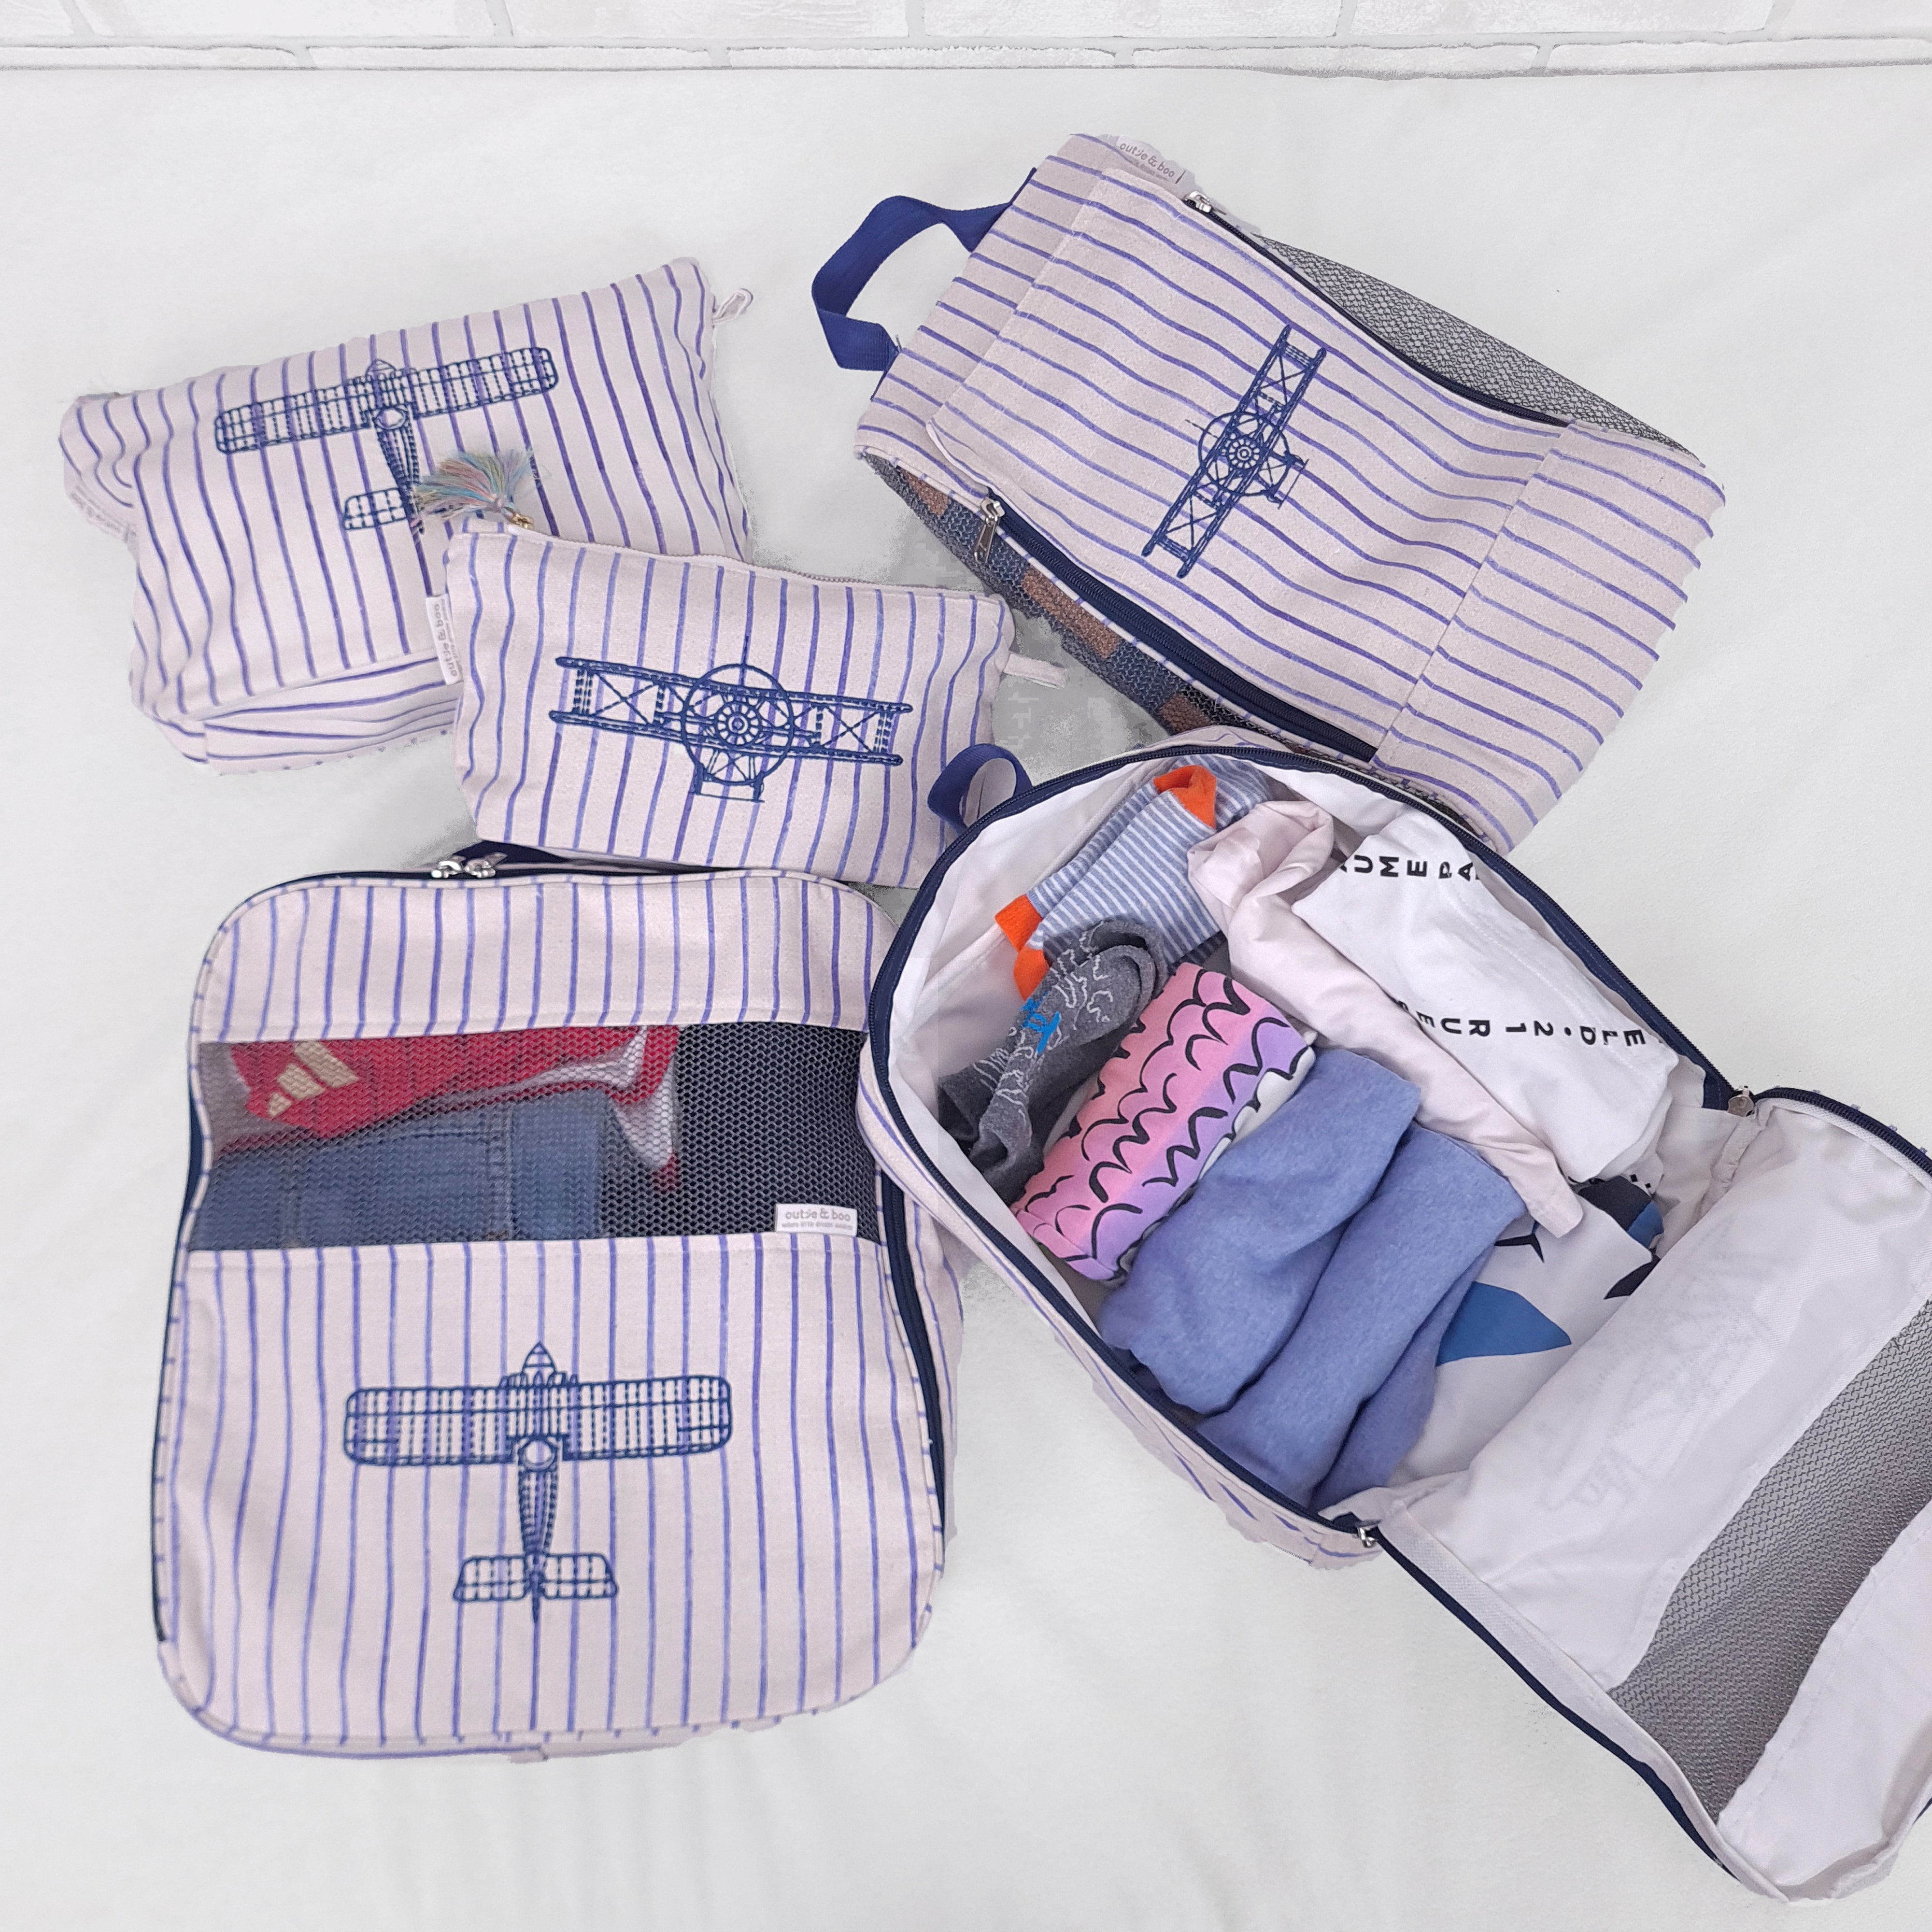 Fly Away With Me Organizer Bags (Set of 5) Small Organizer Bag + Big Organizer Bag + Shoe Bag + Small Pouch + Big Pouch